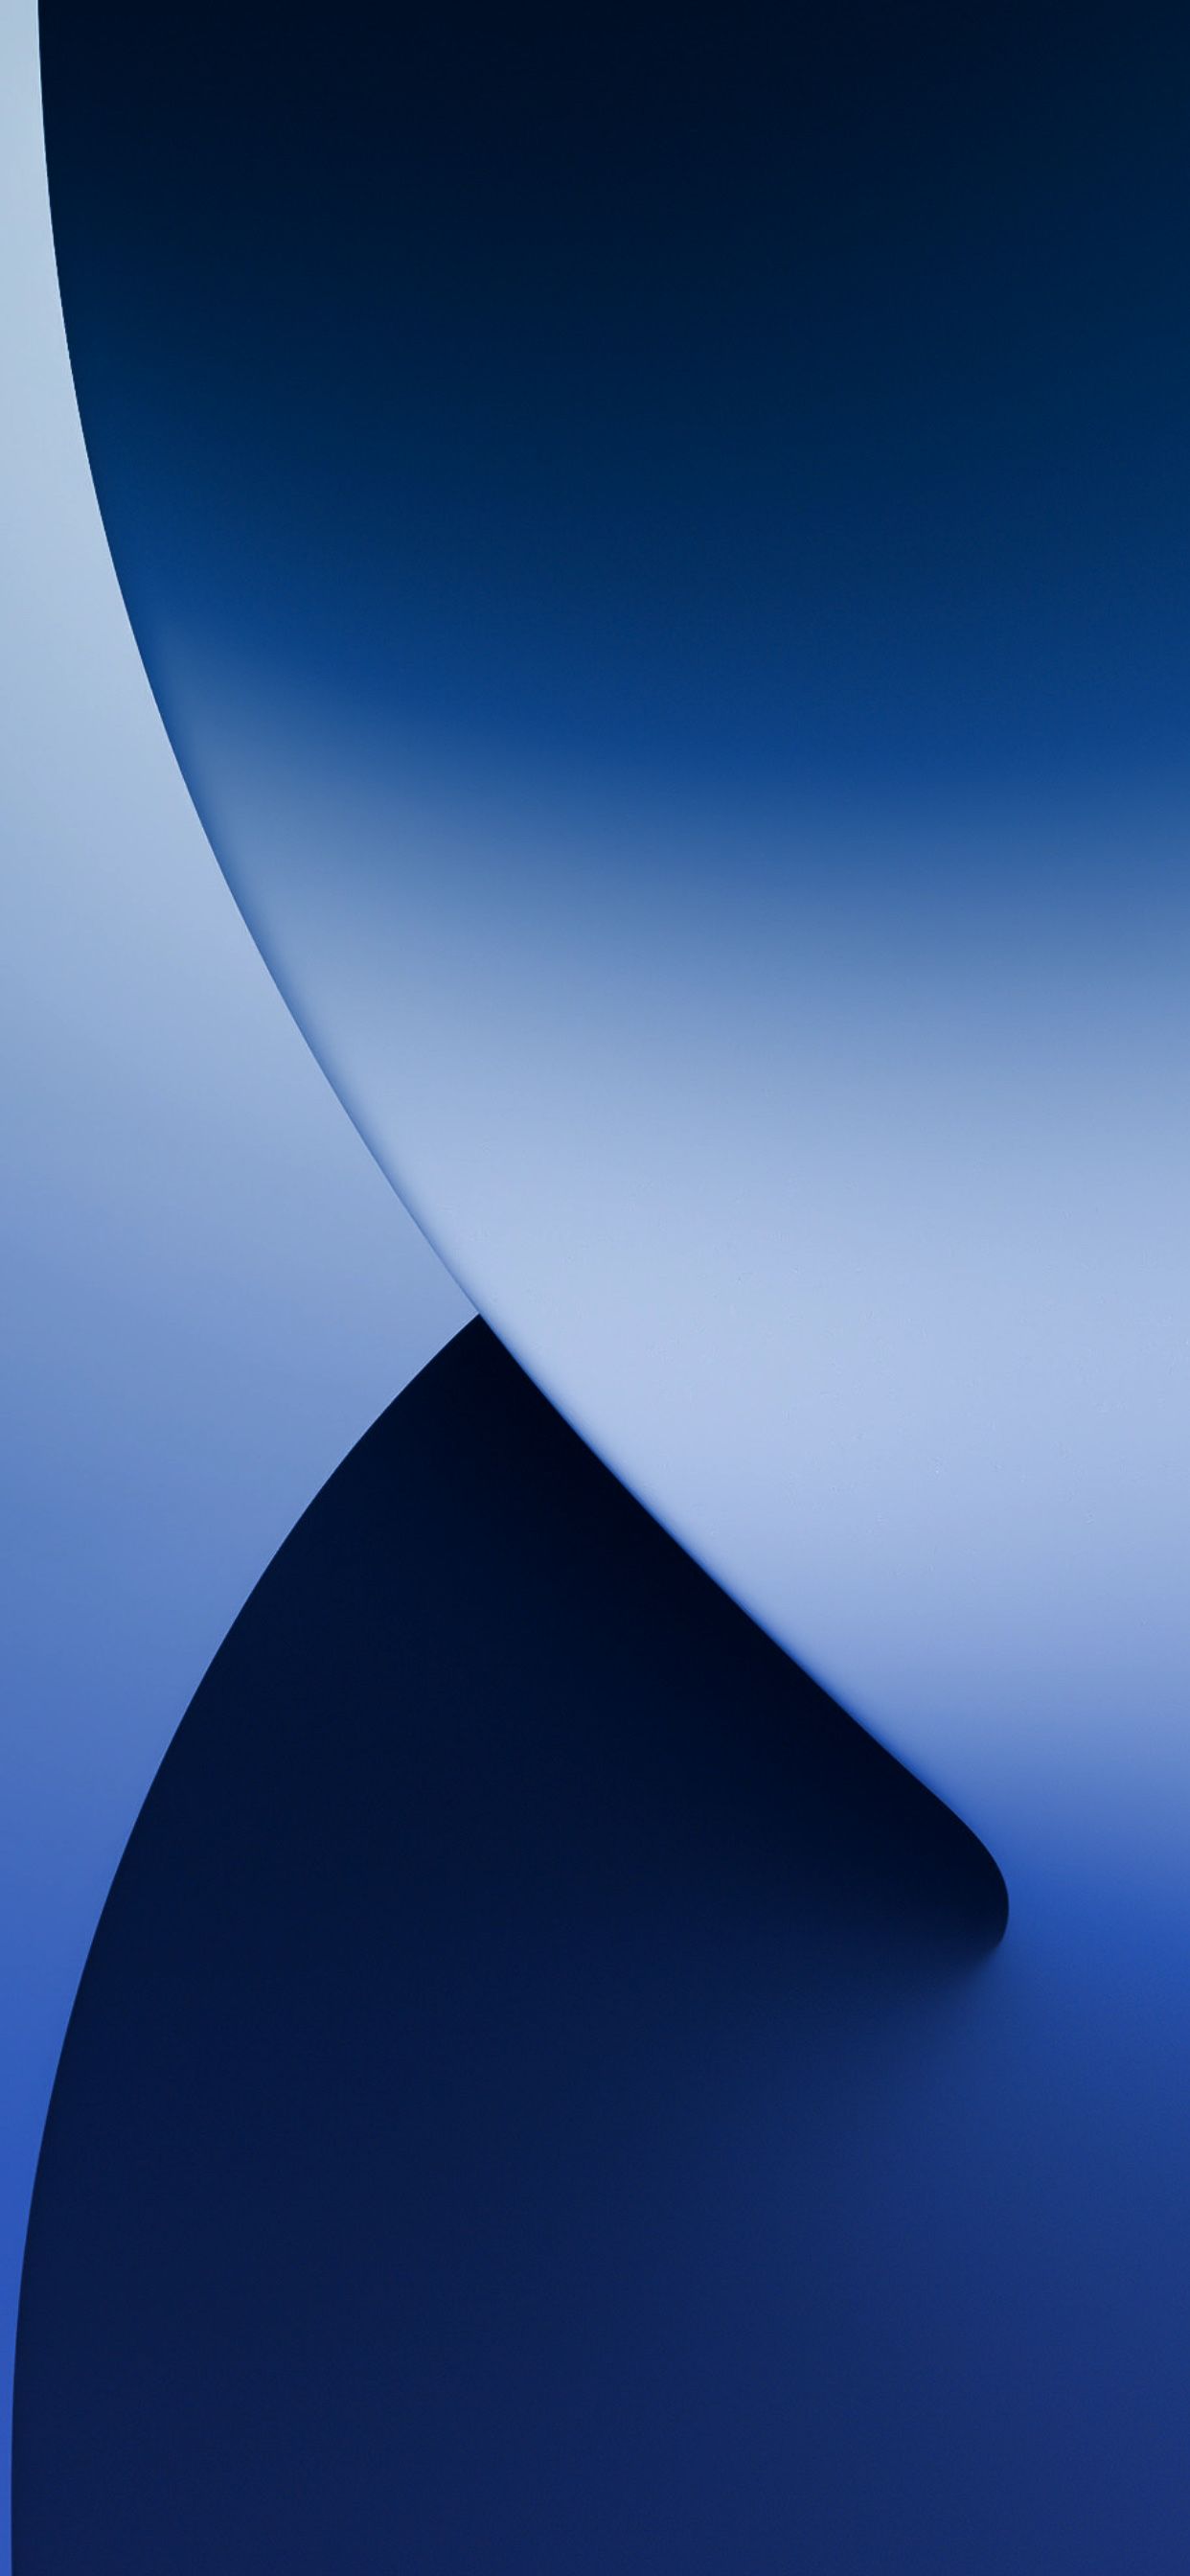 Free download iOS 14 Wallpaper in 2020 Abstract iphone wallpaper Iphone